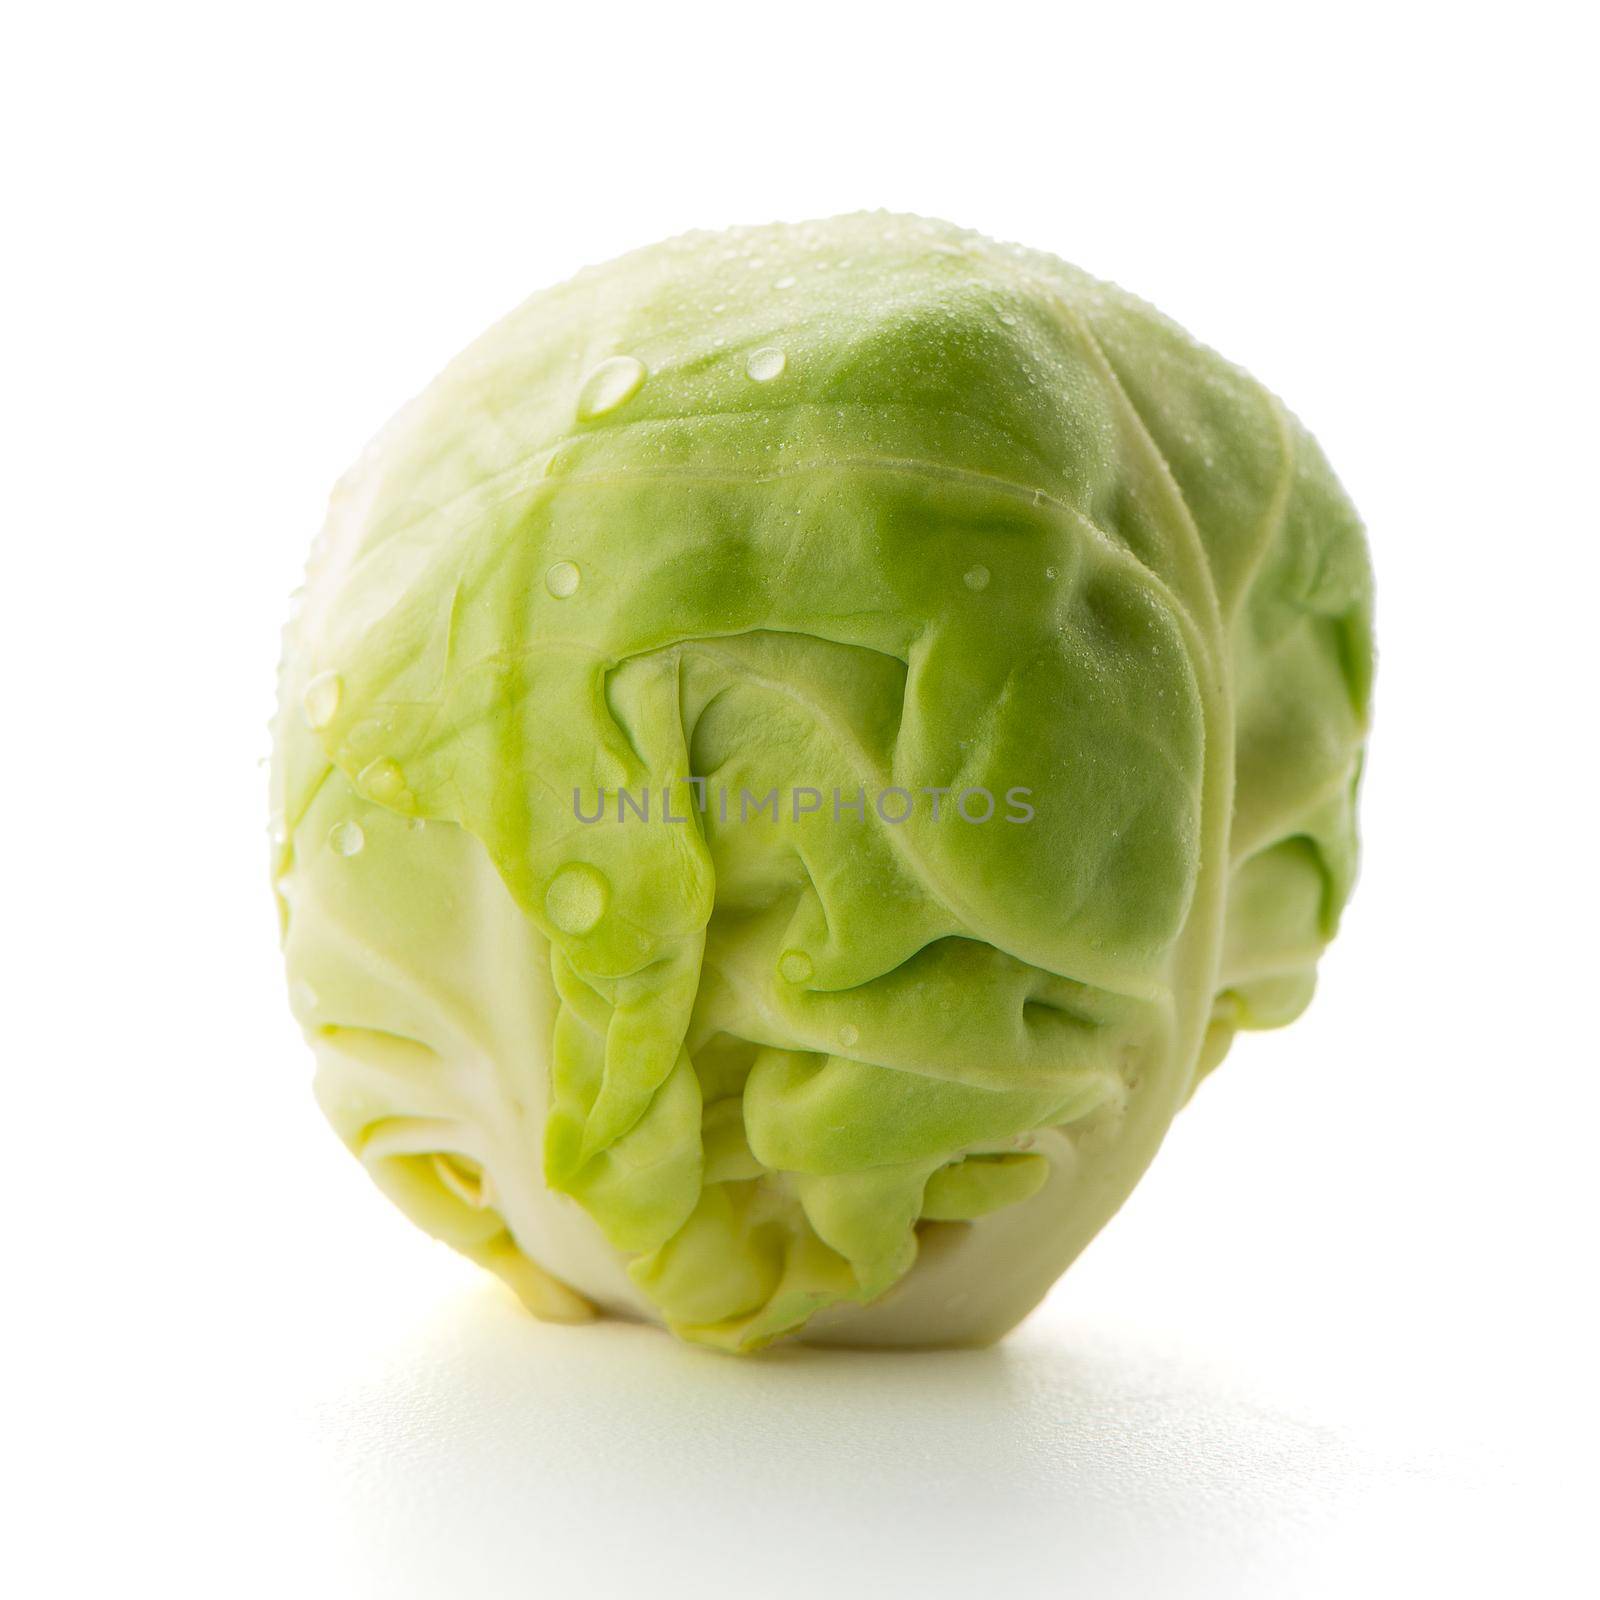 Fresh brussels sprouts by homydesign